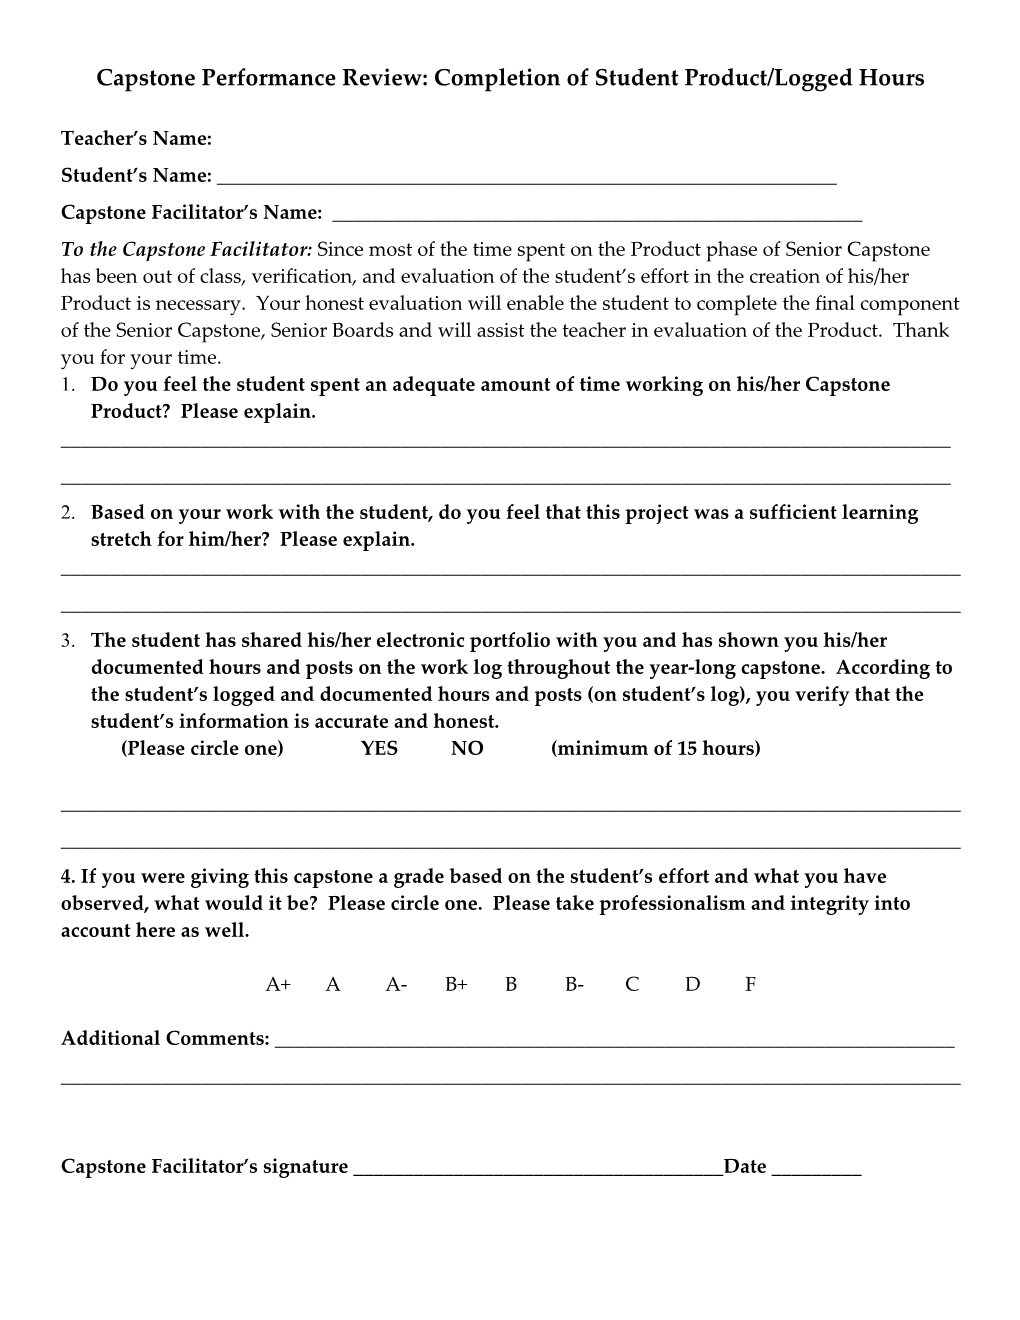 Product Evaluation Form: Completion of Student Product